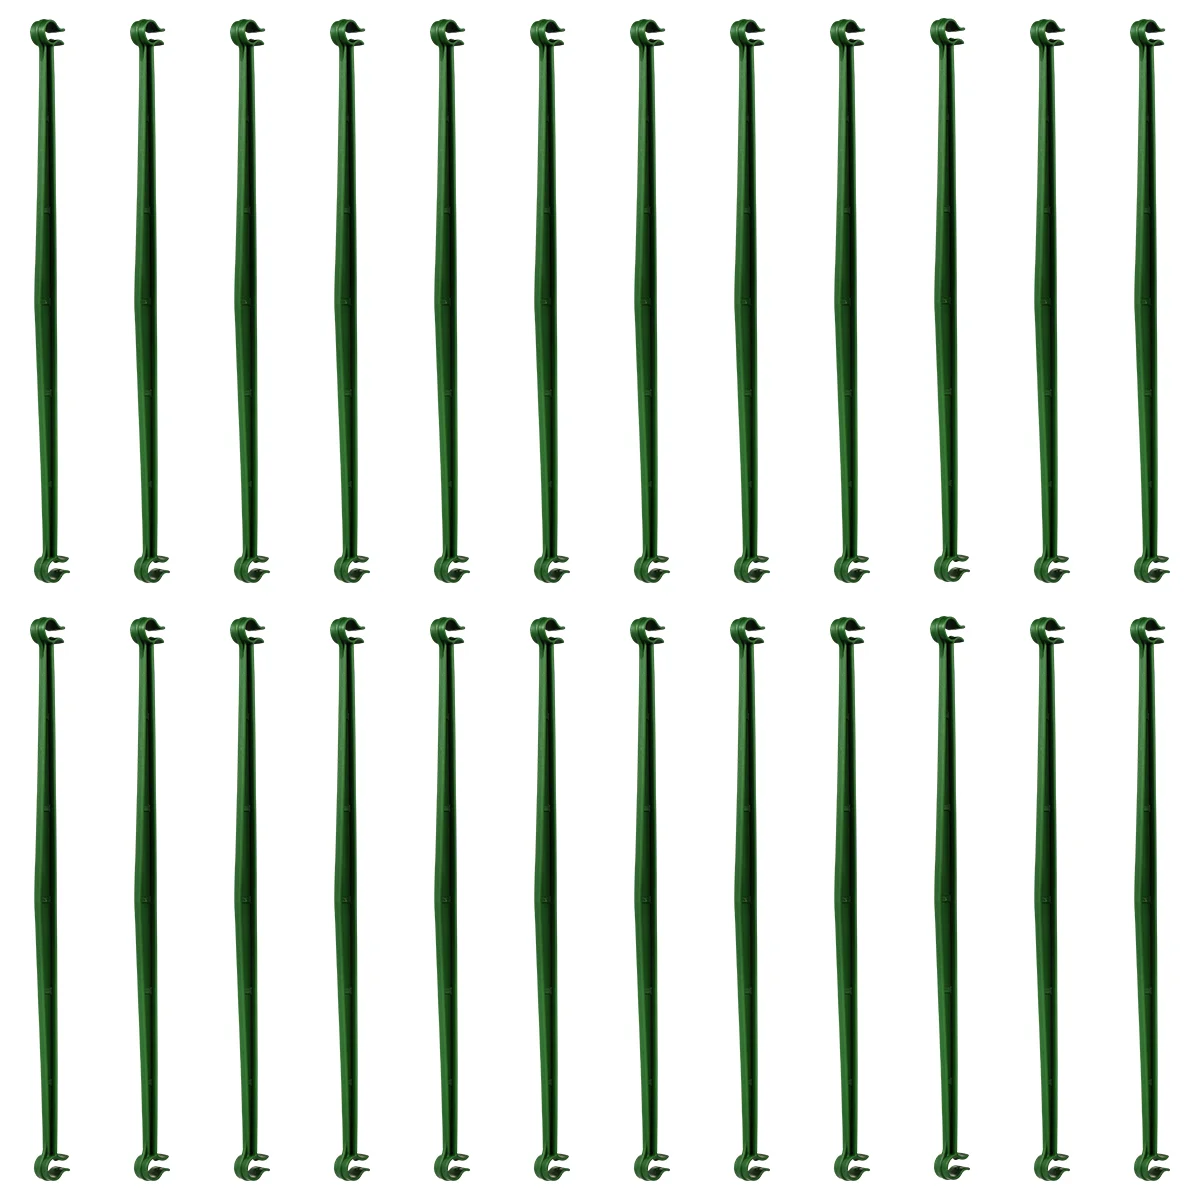 

24pcs Garden Stakes Arms Expandable Trellis Connectors Connecting Rod Brackets for Cage Gardening Supplies